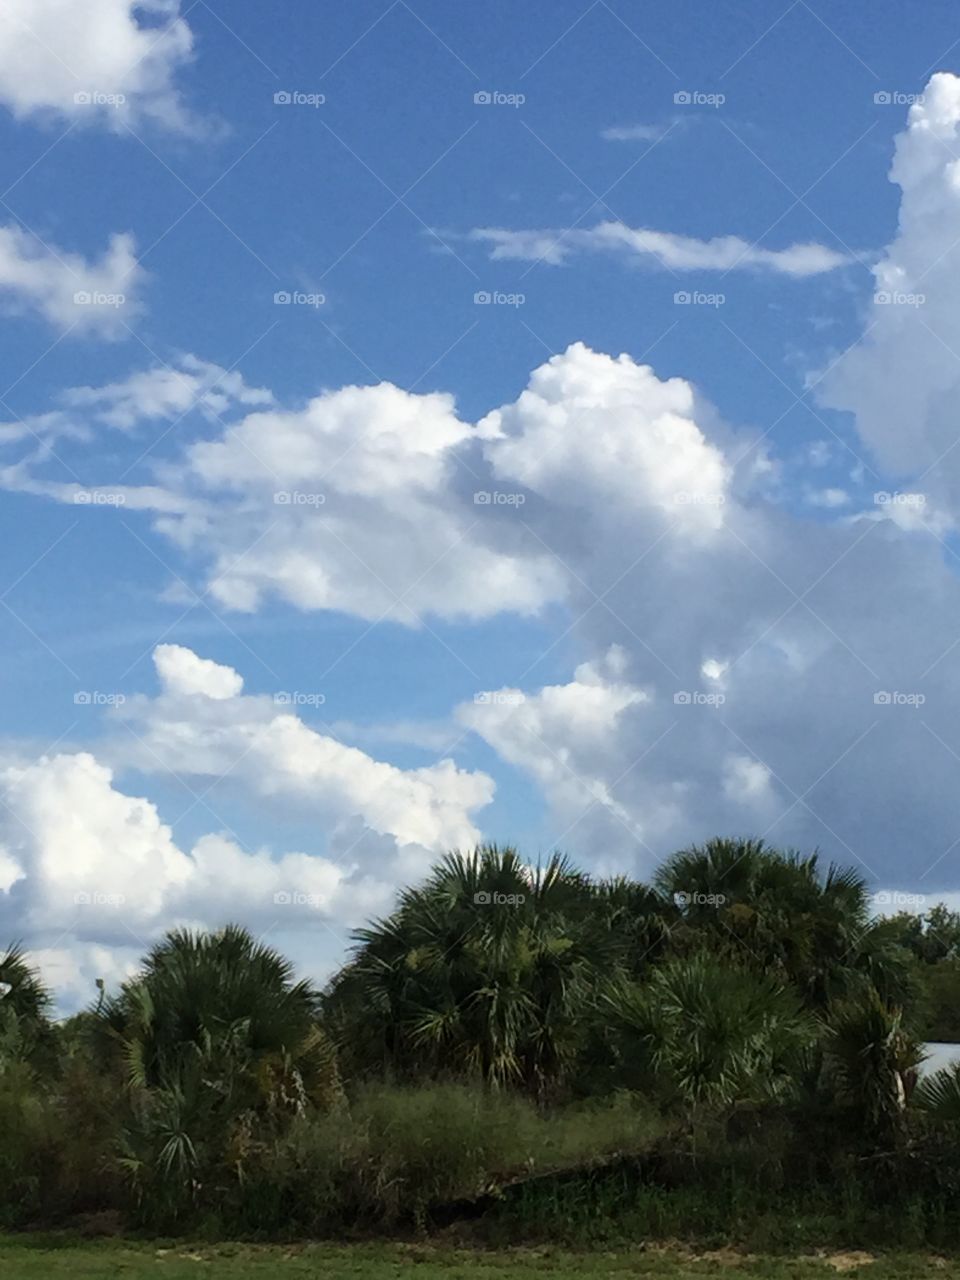 Clouds Over Florida. The beautiful sky in Davenport, FL, August 2015.